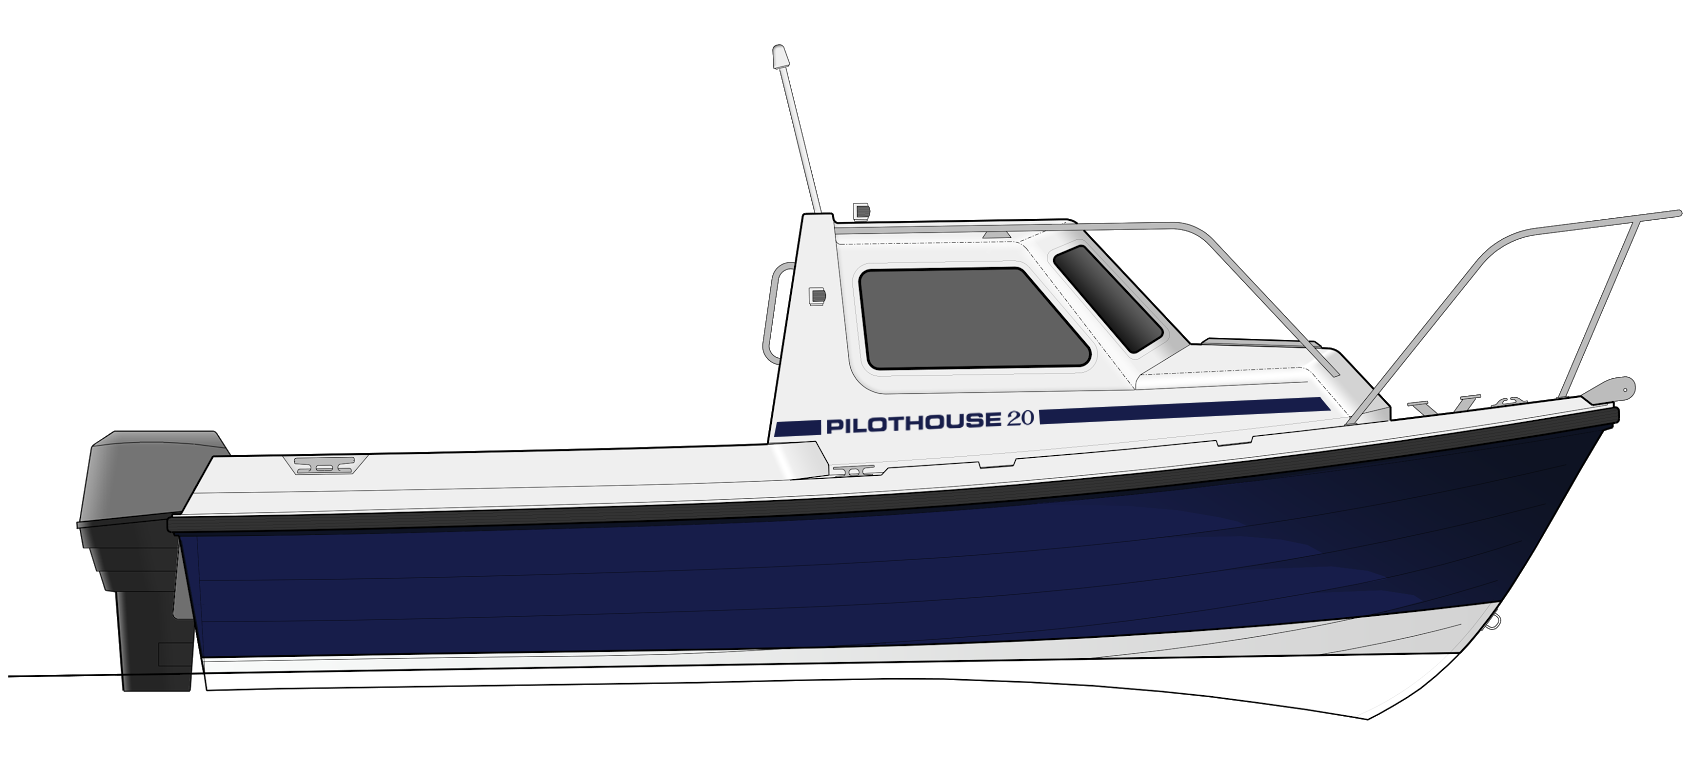 Pilot House 20 | Orkney Boats | Motor Boats & Crafts | Fishing & Leisure |  Trailer Launch